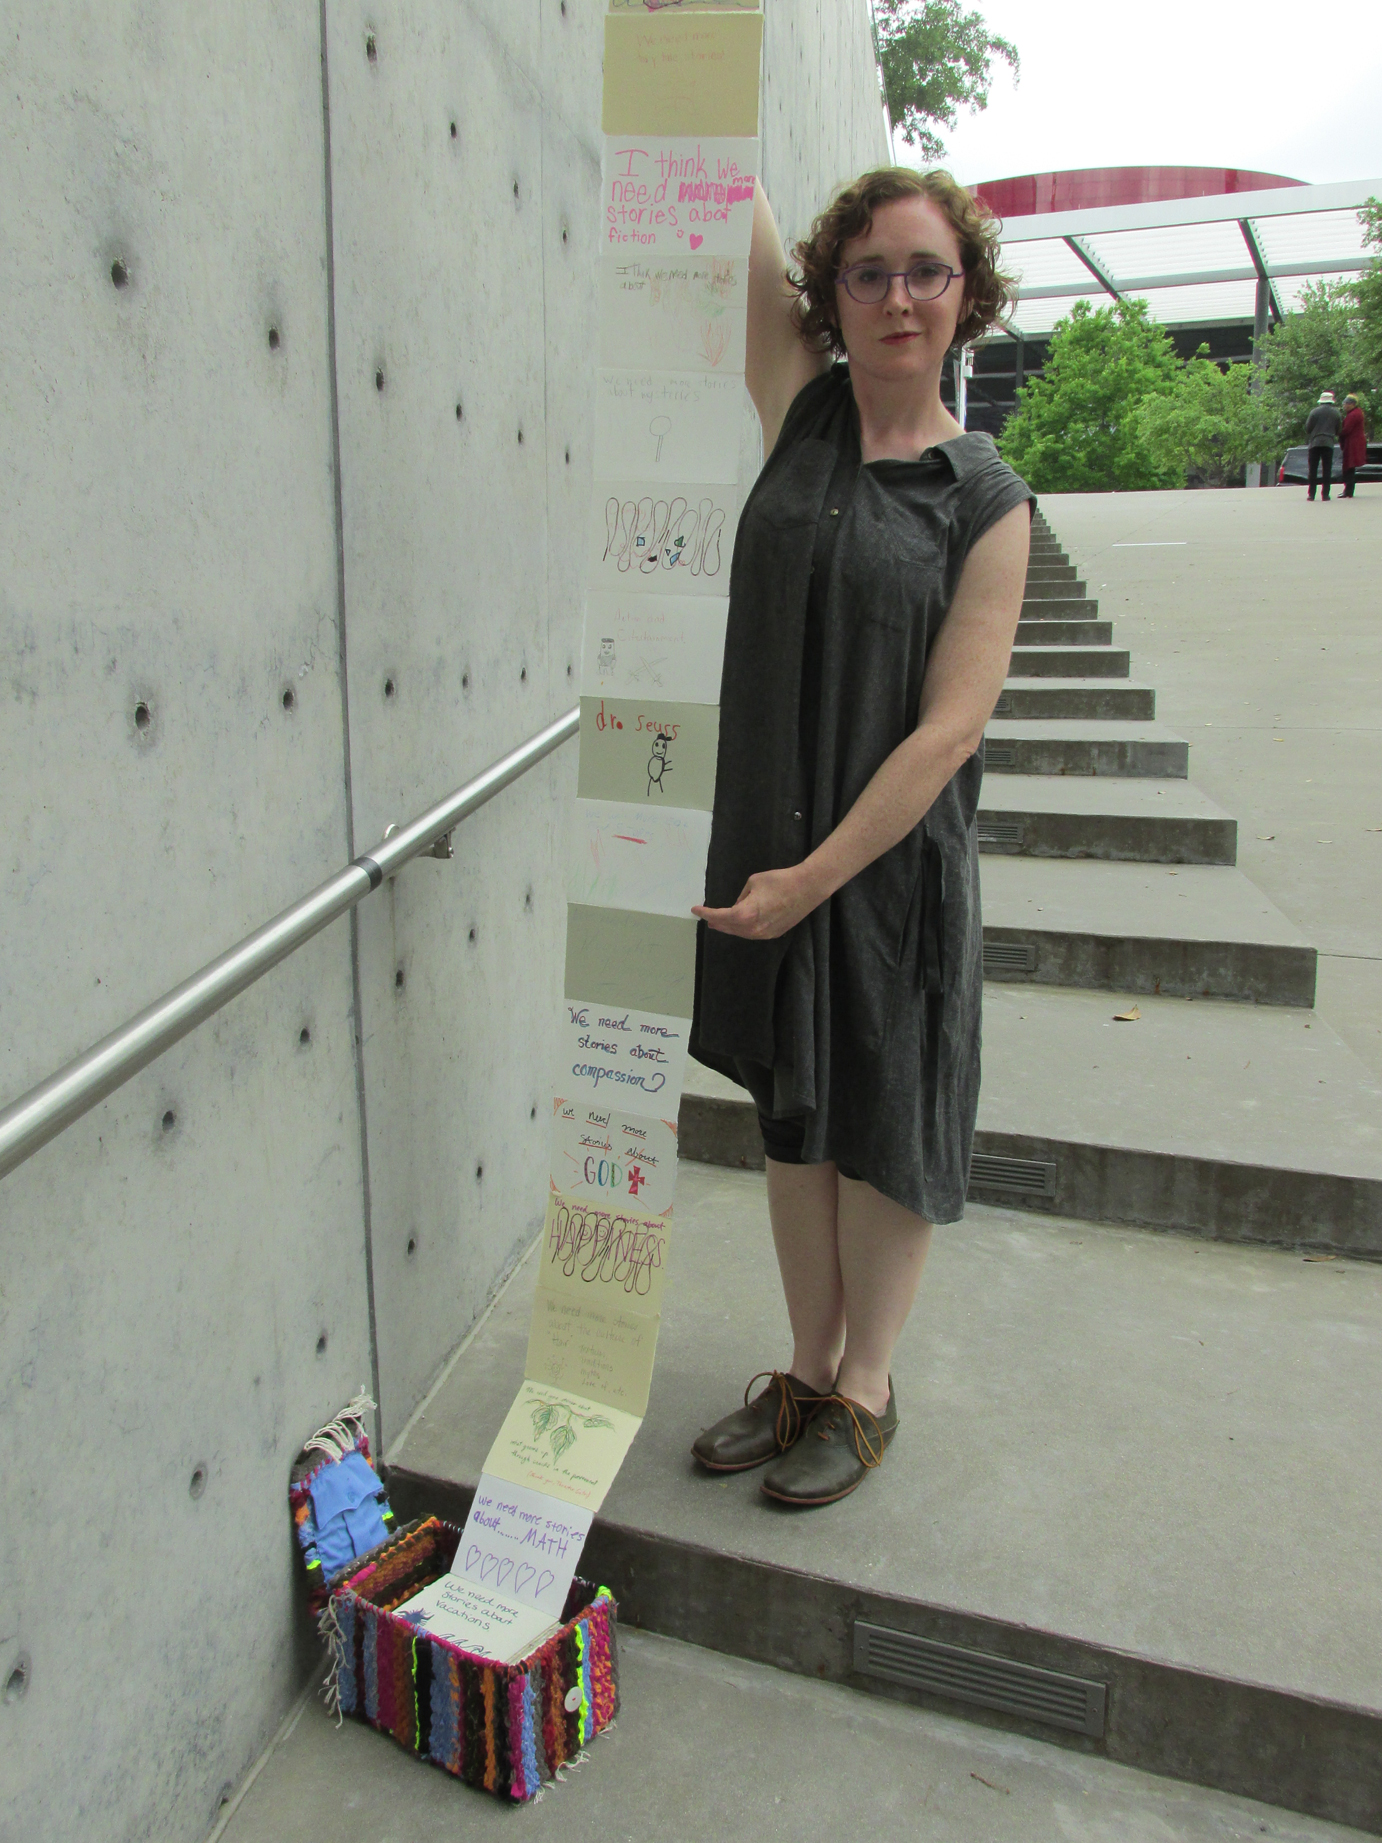 Nasher Prize Laureate Theater Gates by Kendra Greene of Greene Ink Press